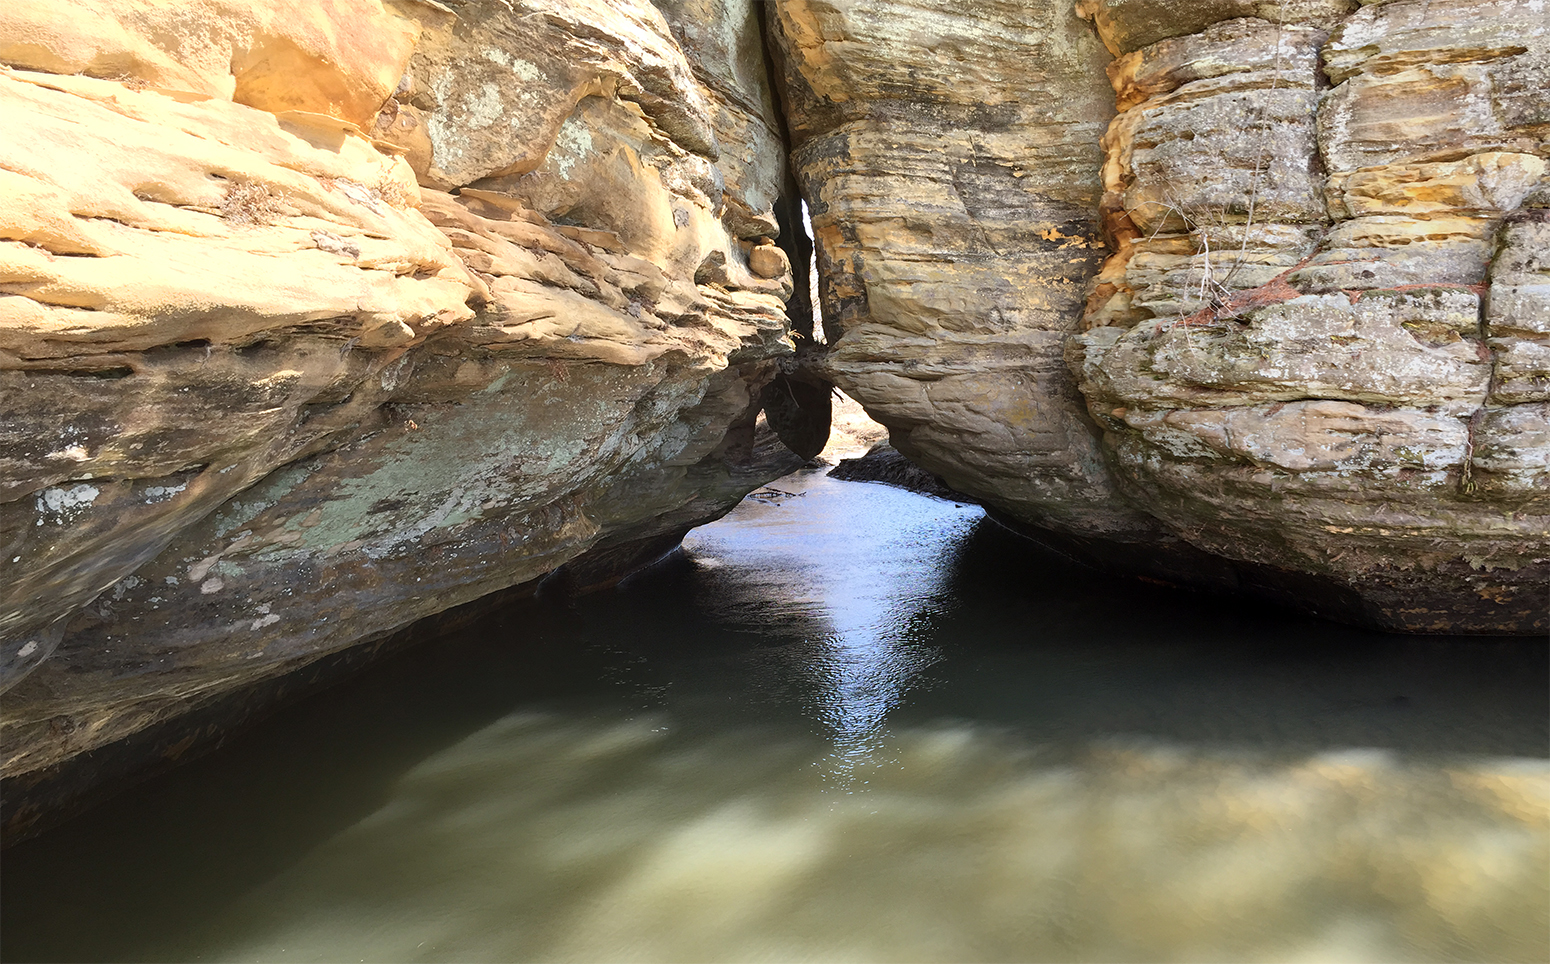 wide angle view of water flowing beneath rock reature